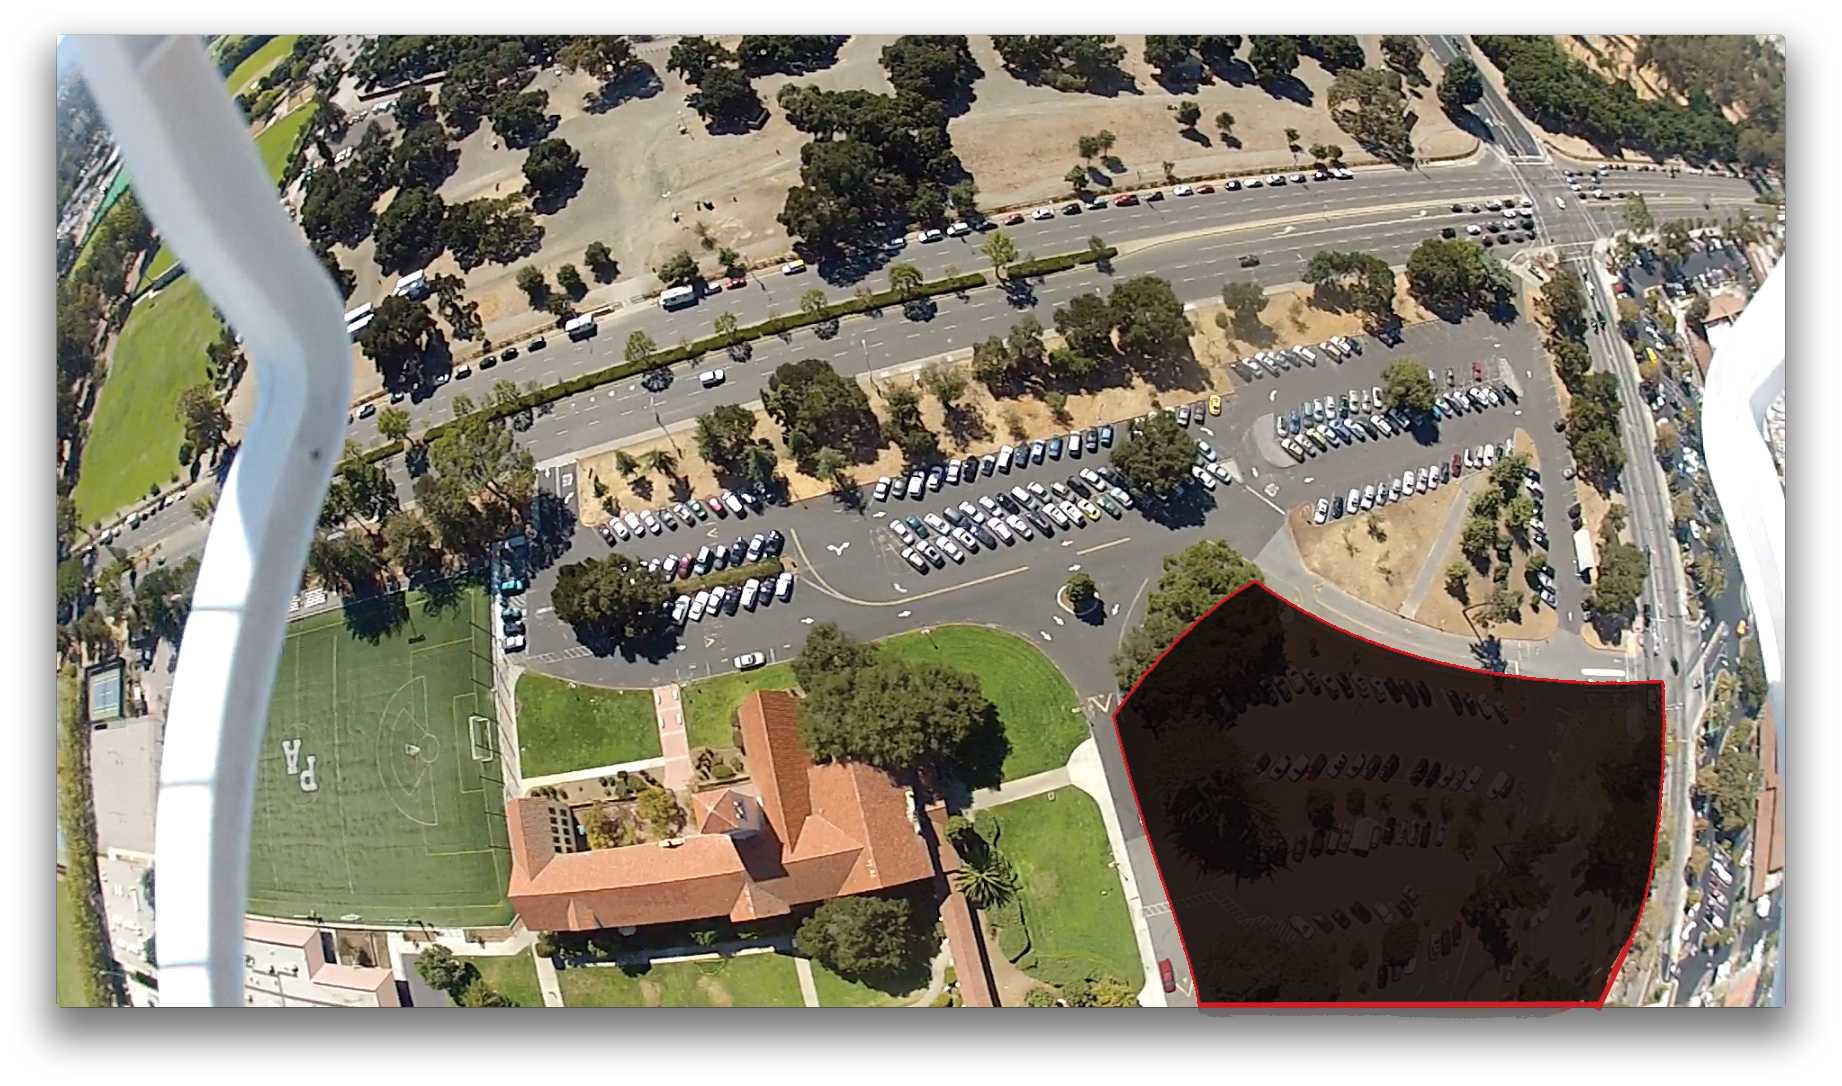 Construction in the upcoming school year will block off a large area of Palo Alto High Schools parking lot. Tower building pictured in bottom left. Photo by Max Bernstein with the Paly Voice Drone